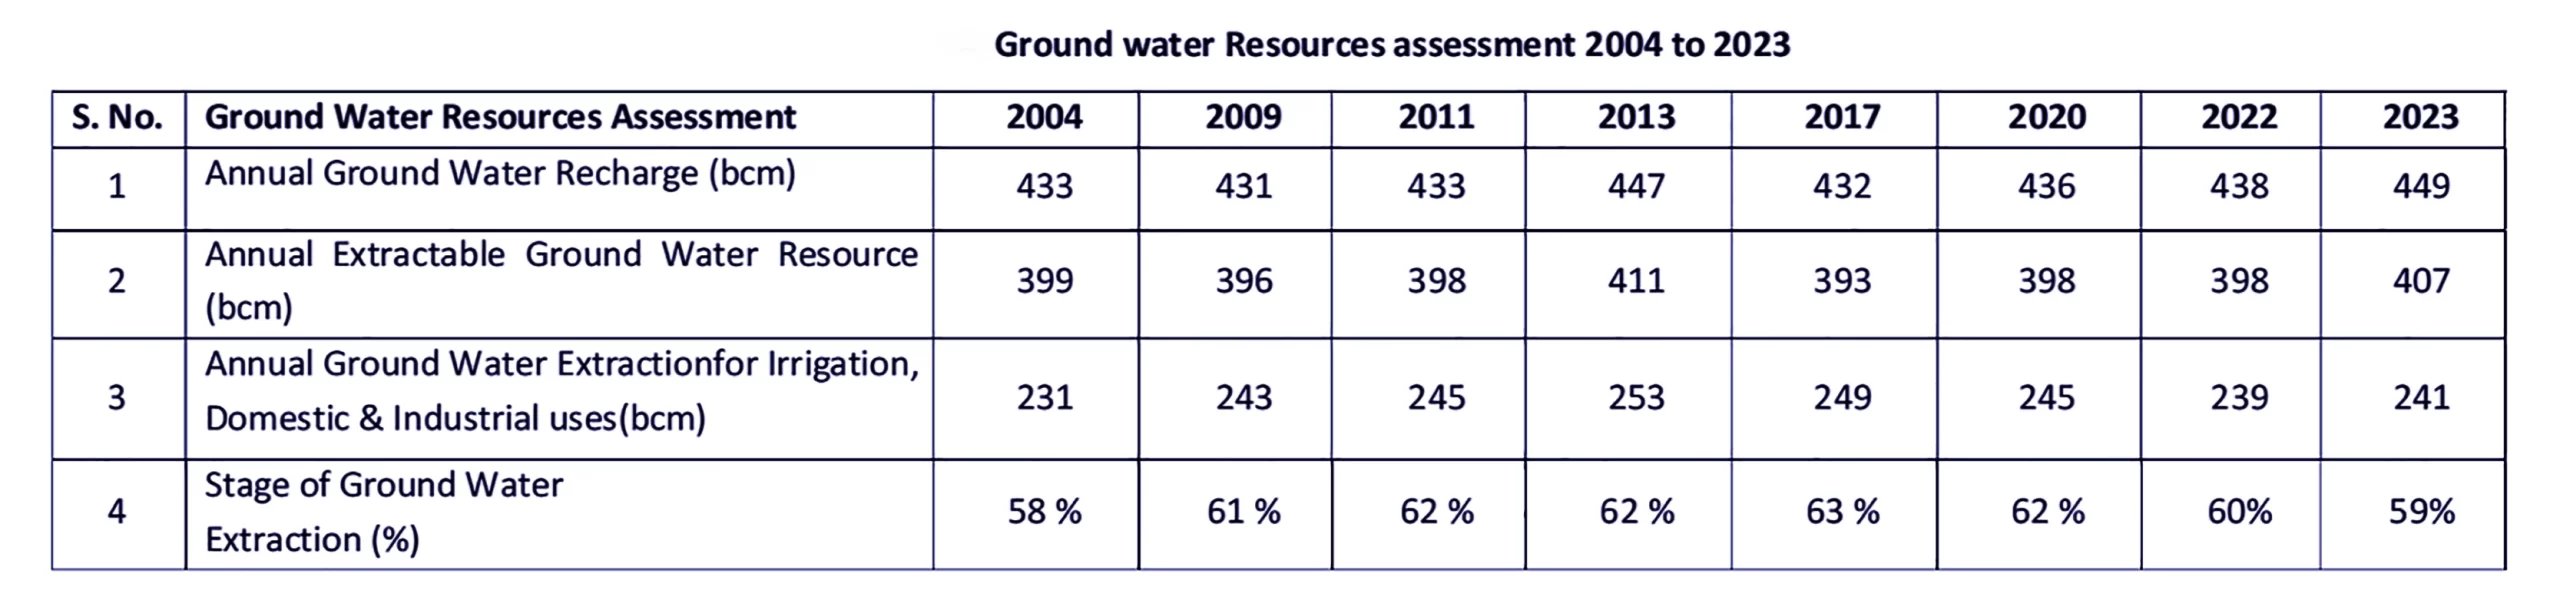 Groundwater Resource Assessment Report 2023